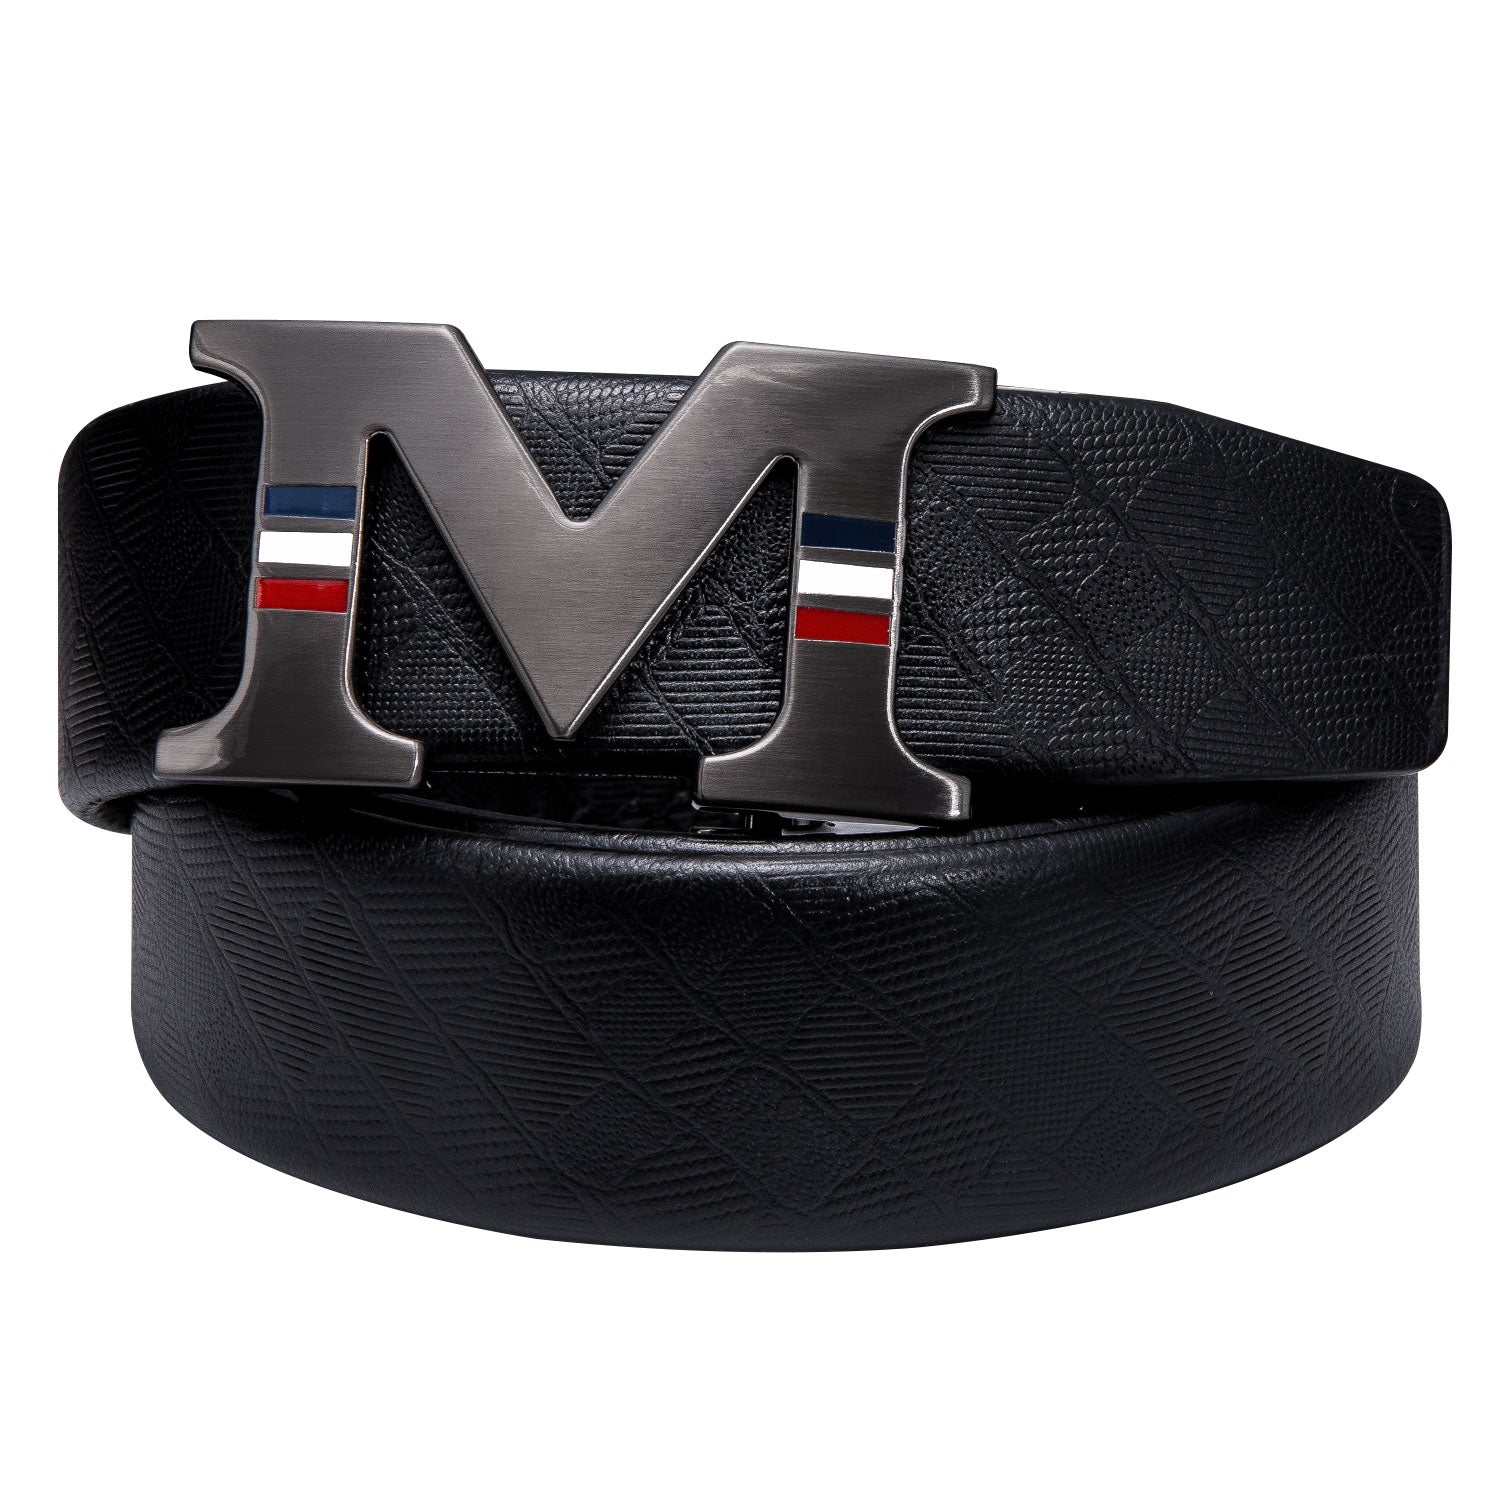 Novelty With M Letter Metal Buckle Genuine Leather Belt 43 inch to 63 inch